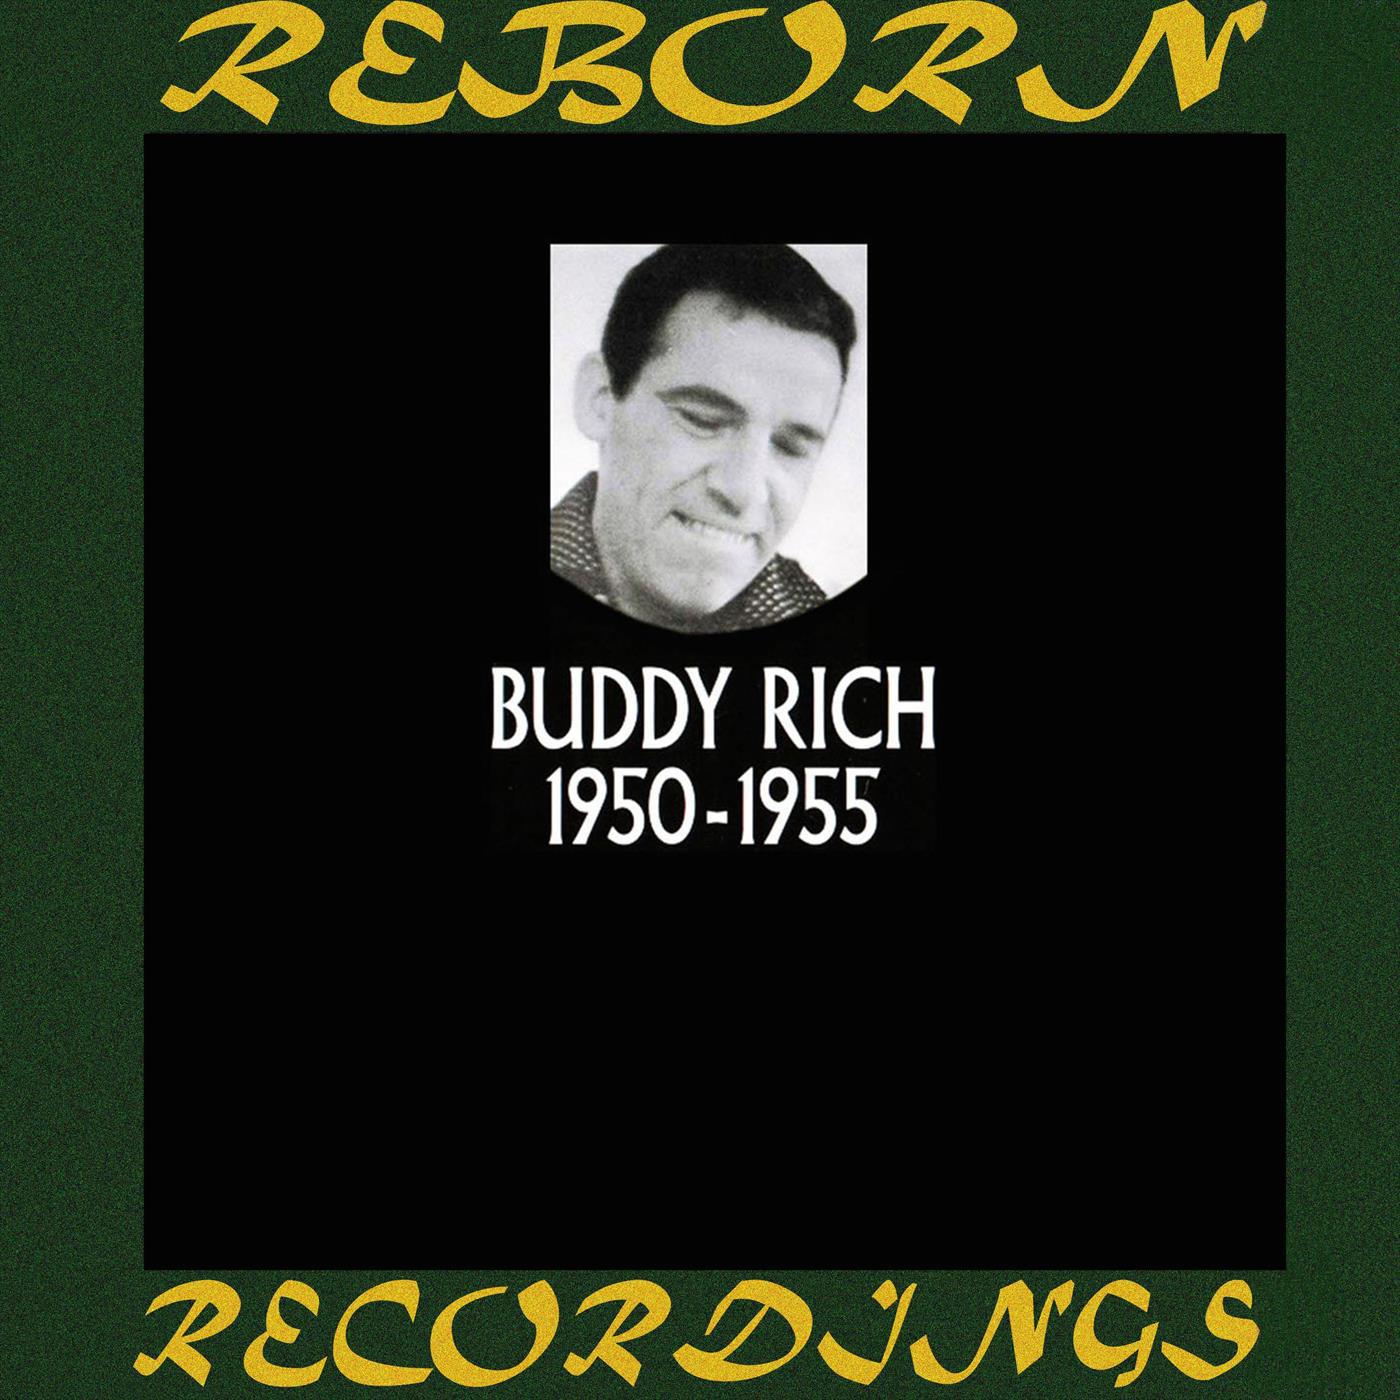 Buddy Rich In Chronology 1950-1955 (HD Remastered)